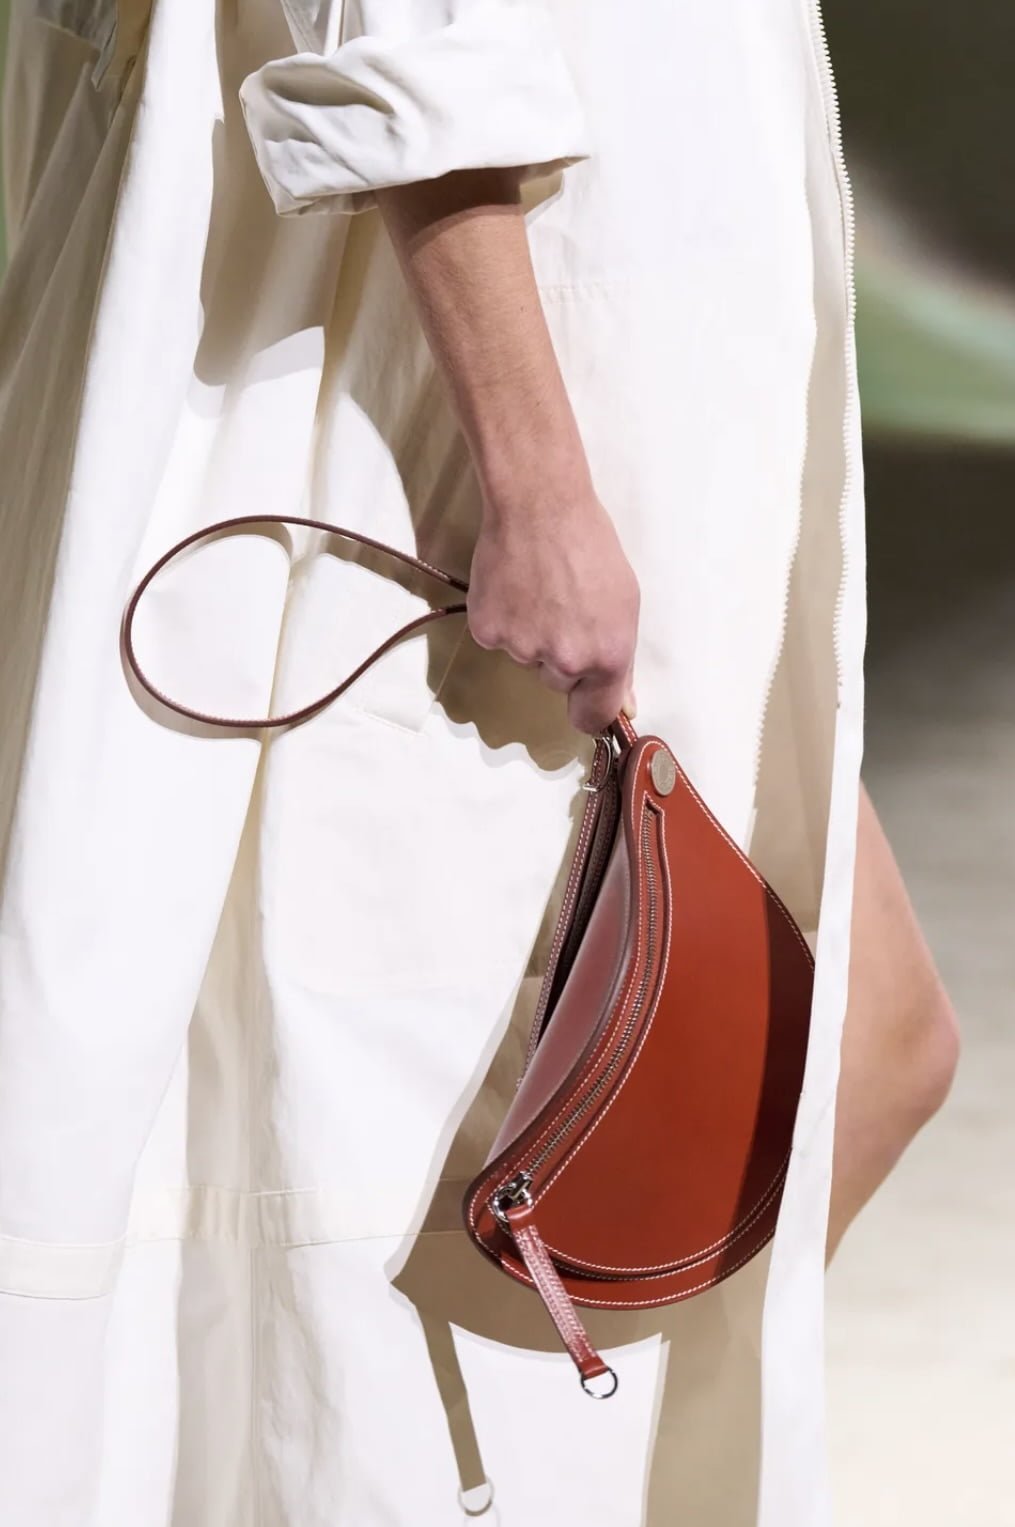 ❗❗There's a NEW Hermes Bag❗❗Should we buy “In the Loop” in 2023? 